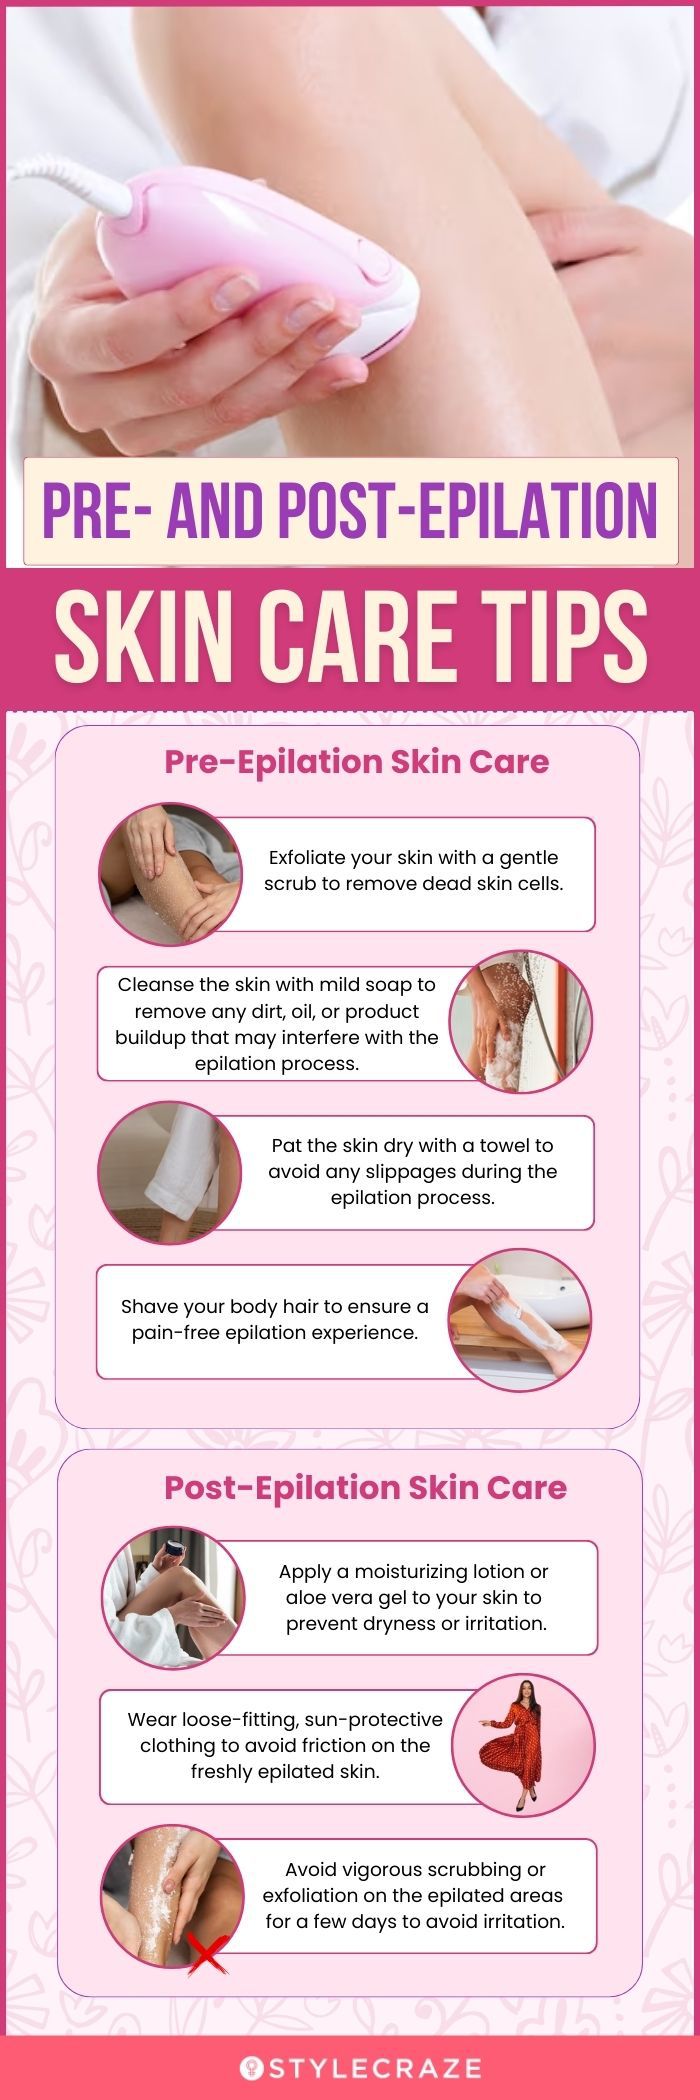  Pre- And Post-Epilation Skin Care Tips (infographic)